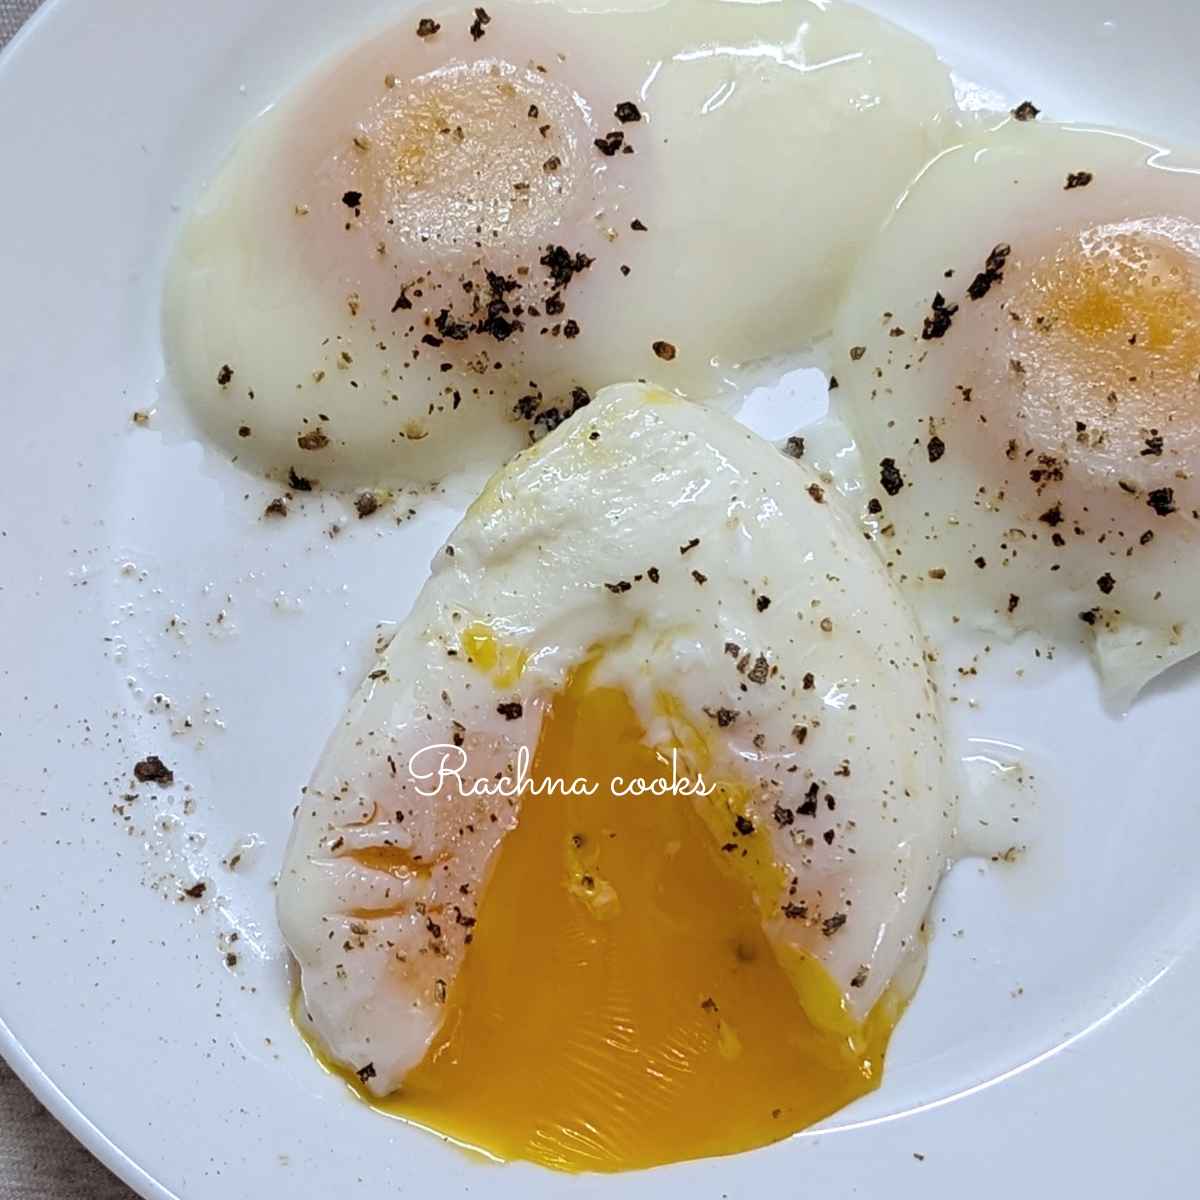 3 poached eggs on a plate with a broken yolk,